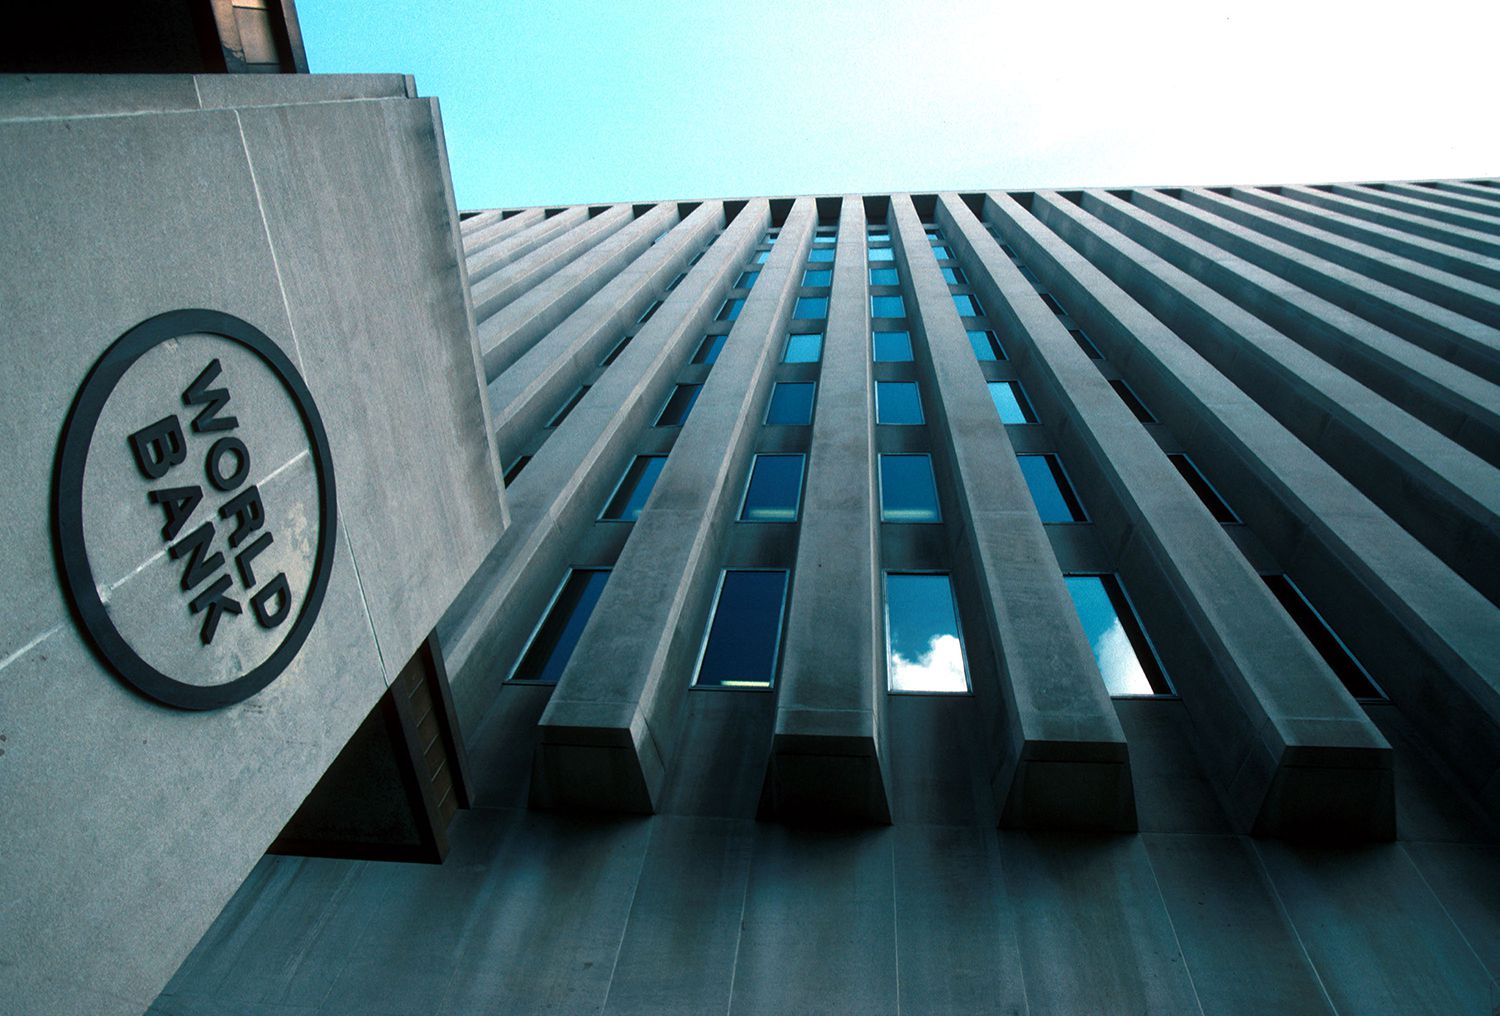 Nigeria Faces ‘Fiscal Time Bomb’ - World Bank